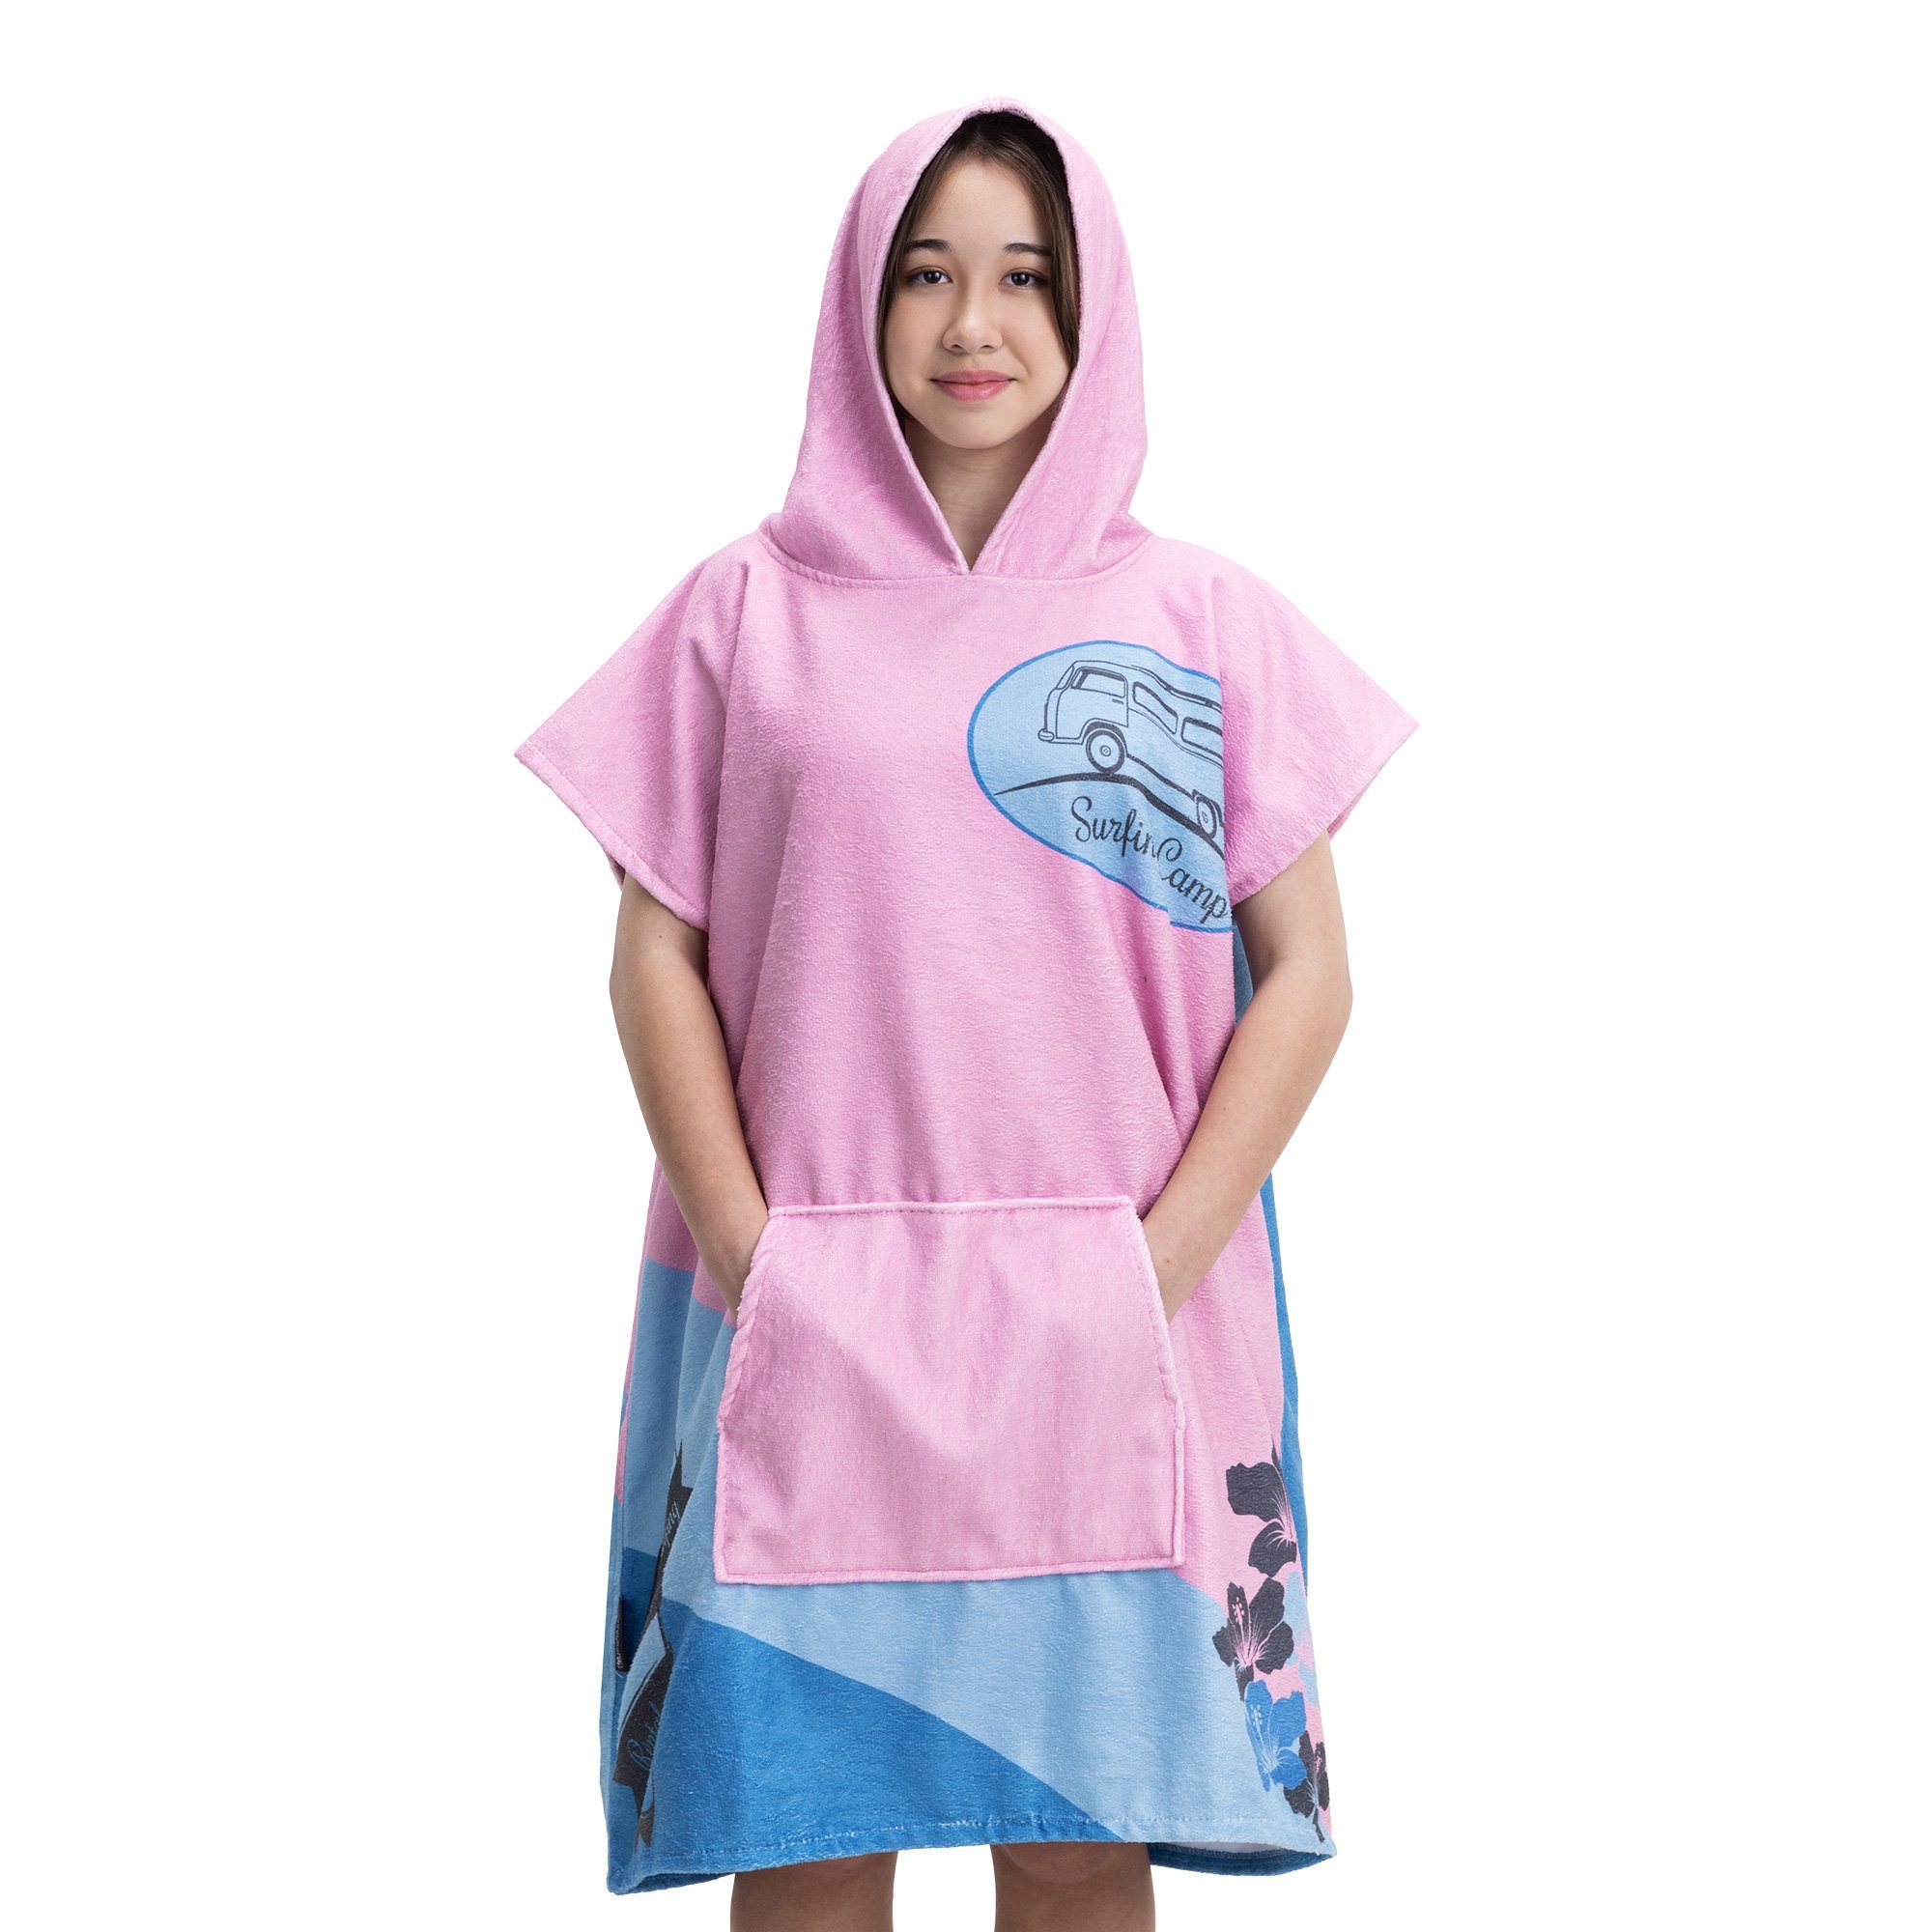 Homelevel Teenager Kinder Surfponcho Poncho Badeponcho Strandtuch Handtuch Cape Baumwollmischung Velours Frottee Badetuch mit Kapuze